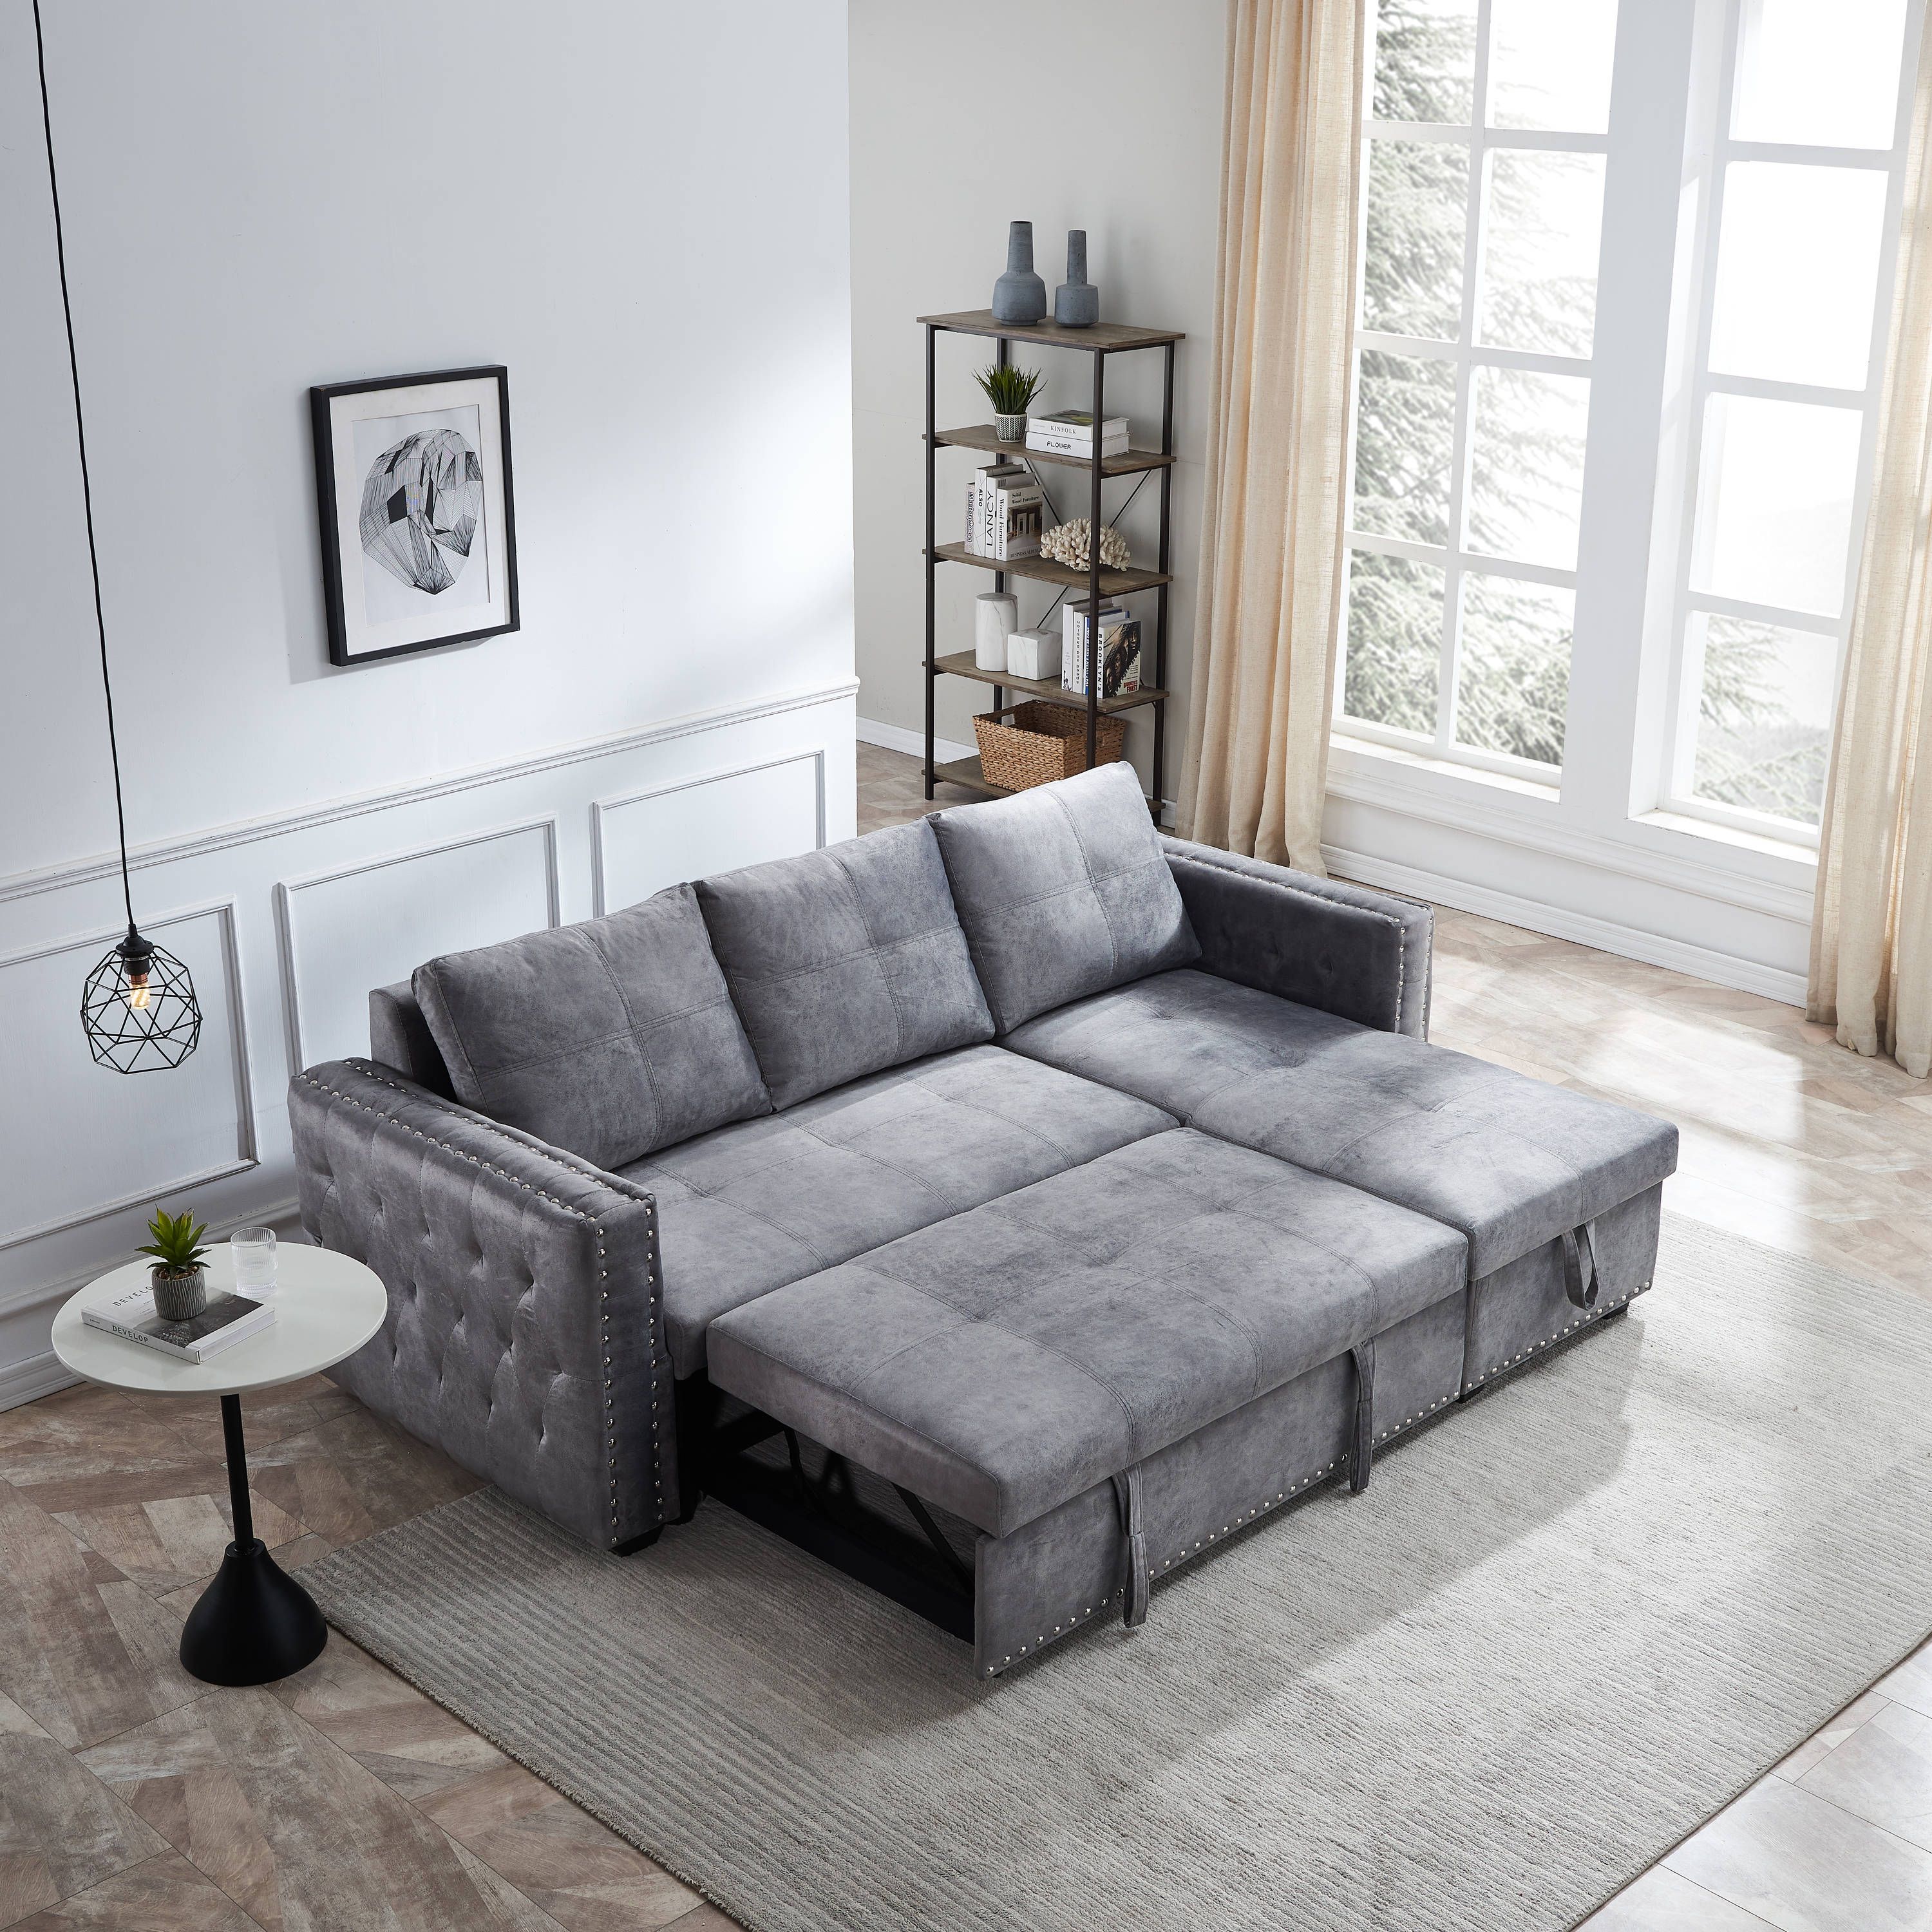 Clihome Sofa With Pulled Out Bed Modern Gray Polyester/blend Sleeper In The  Couches, Sofas & Loveseats Department At Lowes Throughout Pull Out Couch Beds (Gallery 1 of 20)